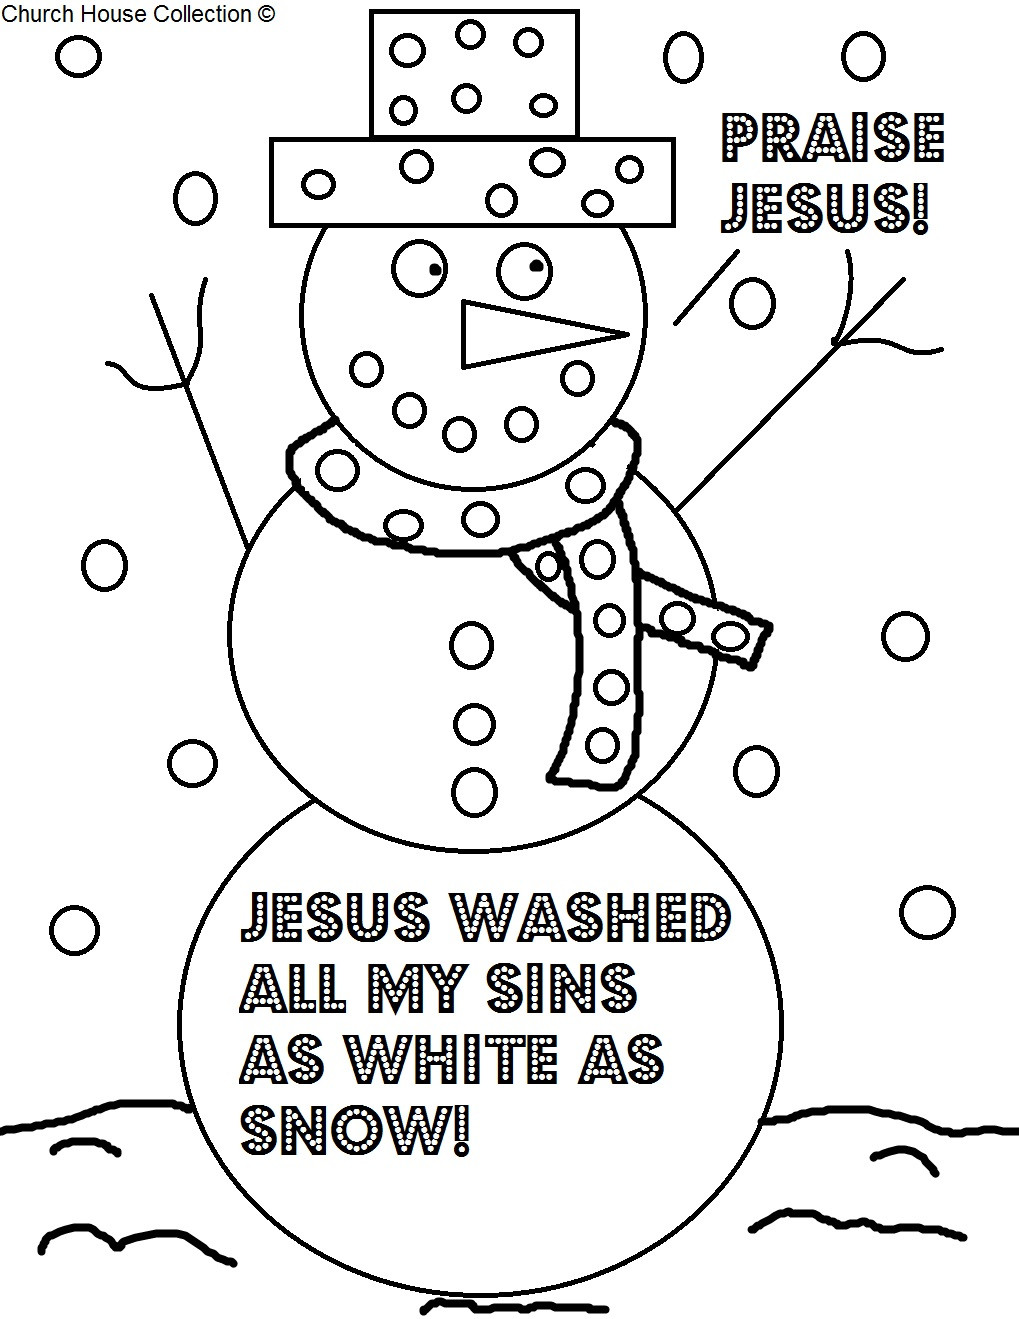 Sunday School Coloring Pages Kids
 Church House Collection Blog Christmas Coloring Page For